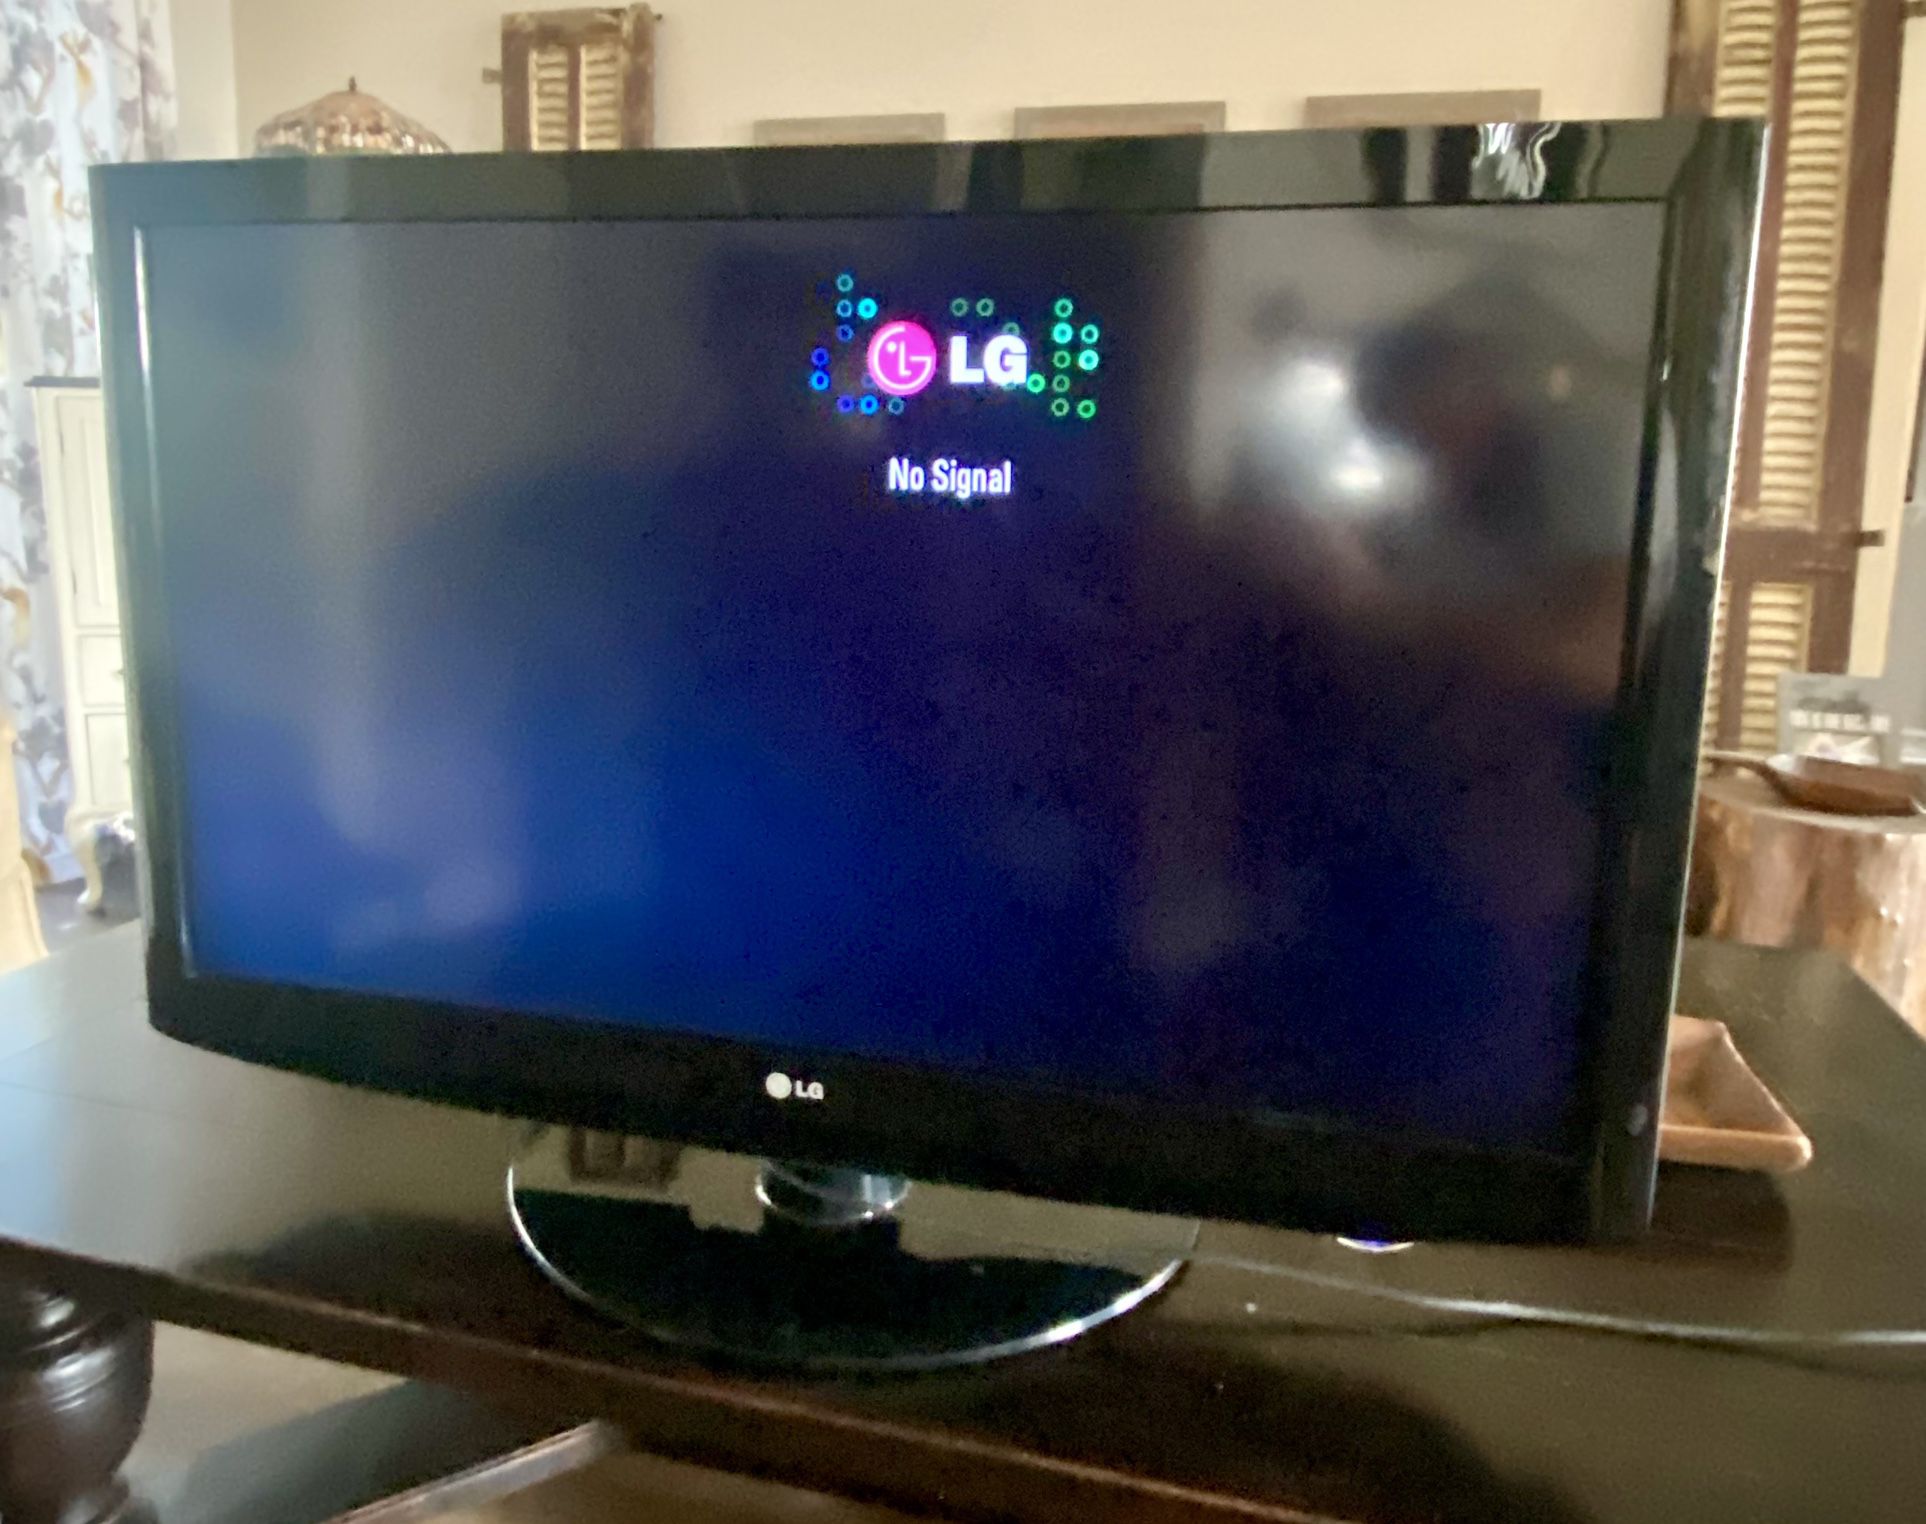 FREE To Give Away - 42” LG LCD TV 